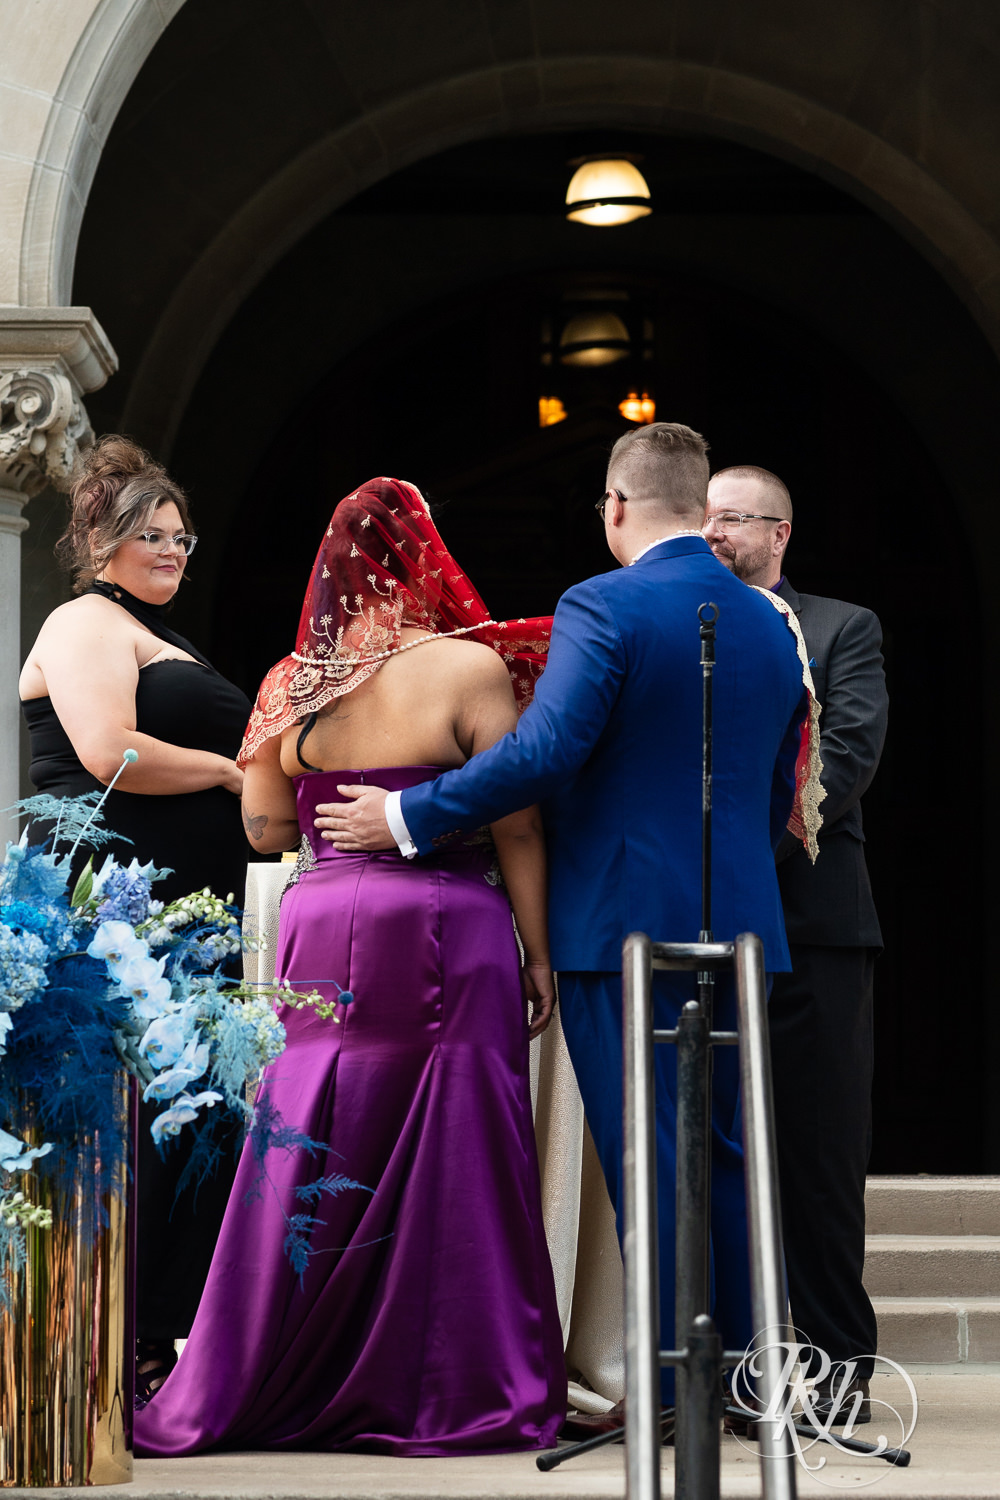 Filipino bride in purple wedding dress and groom hold hands during wedding ceremony at the American Swedish Institute in Minneapolis, Minnesota.